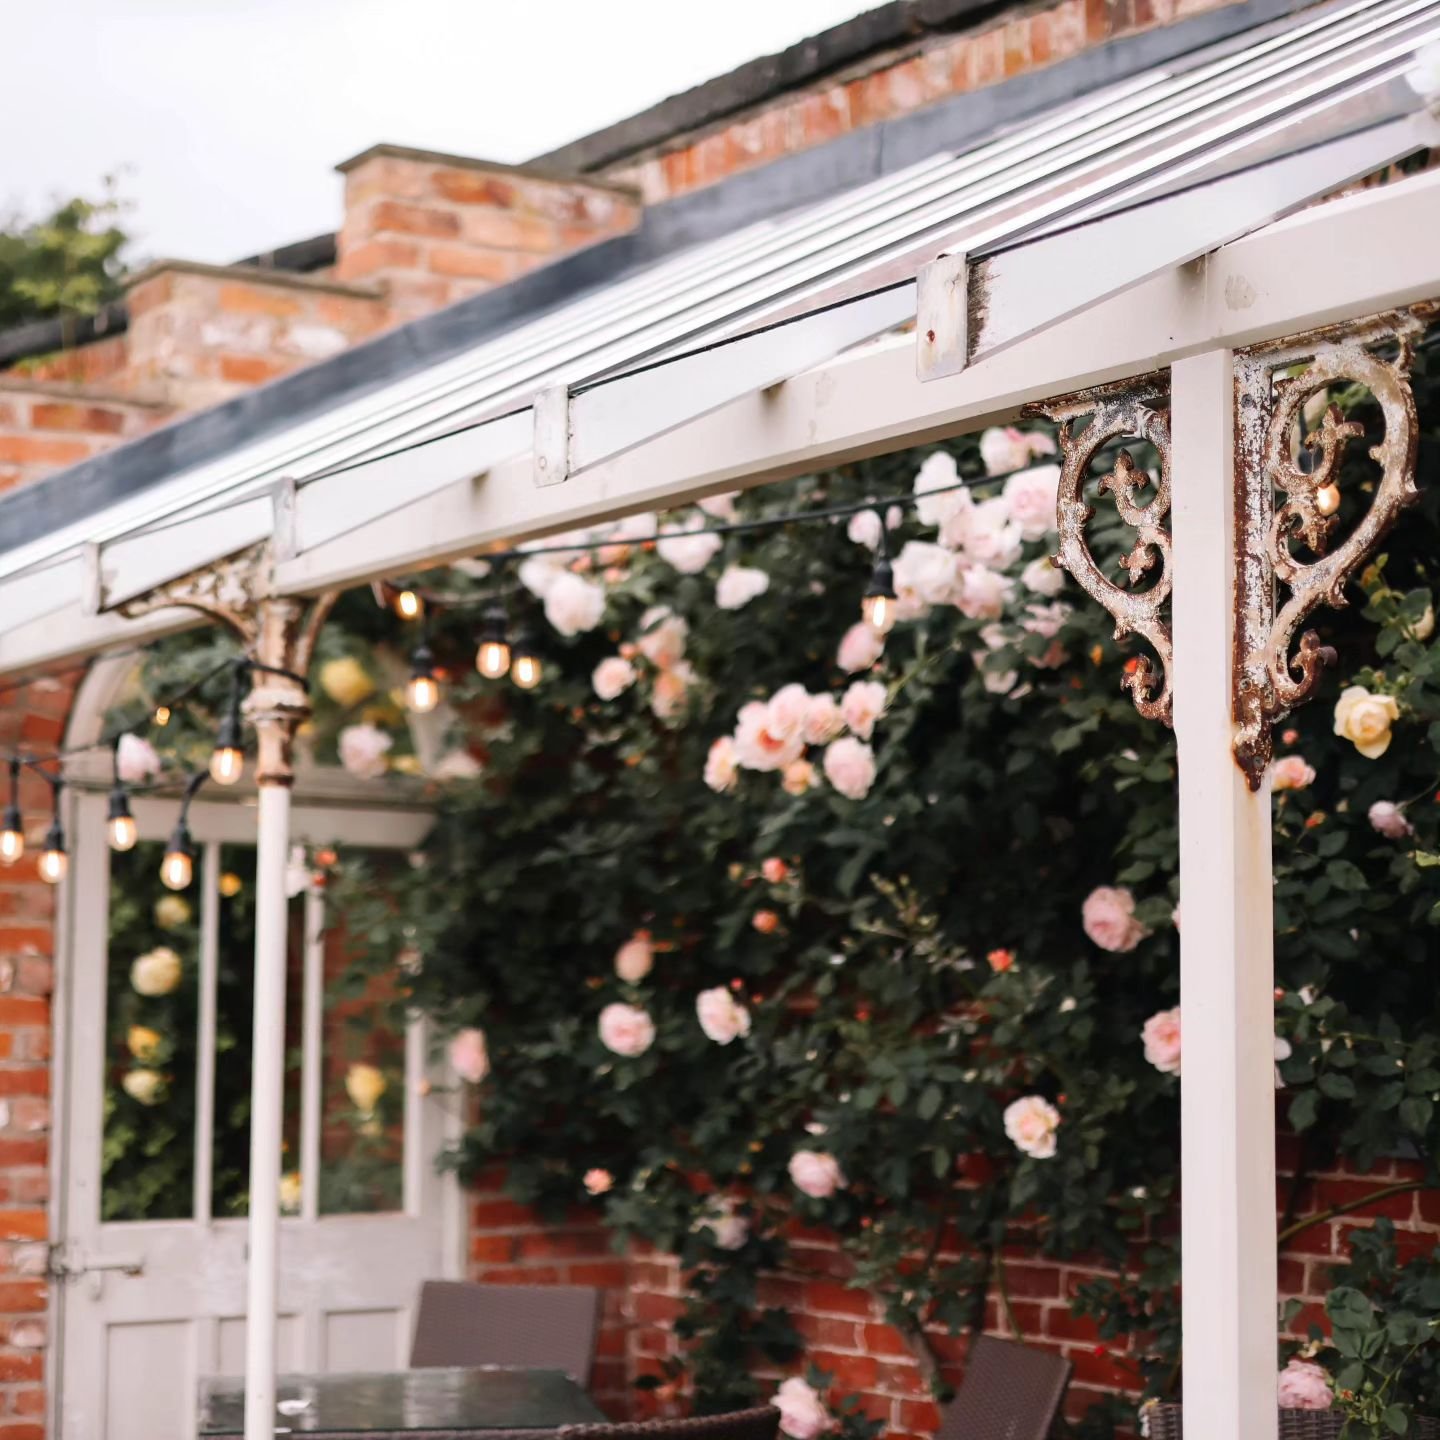 The Walled Garden's peak wedding season commences 🔔

Summer weddings have begun, and our garden takes centre stage, blossoming with an array of colours as different flowers and plants flourish 🌼🌸🌿

Here's to the garden shining brightly over the n